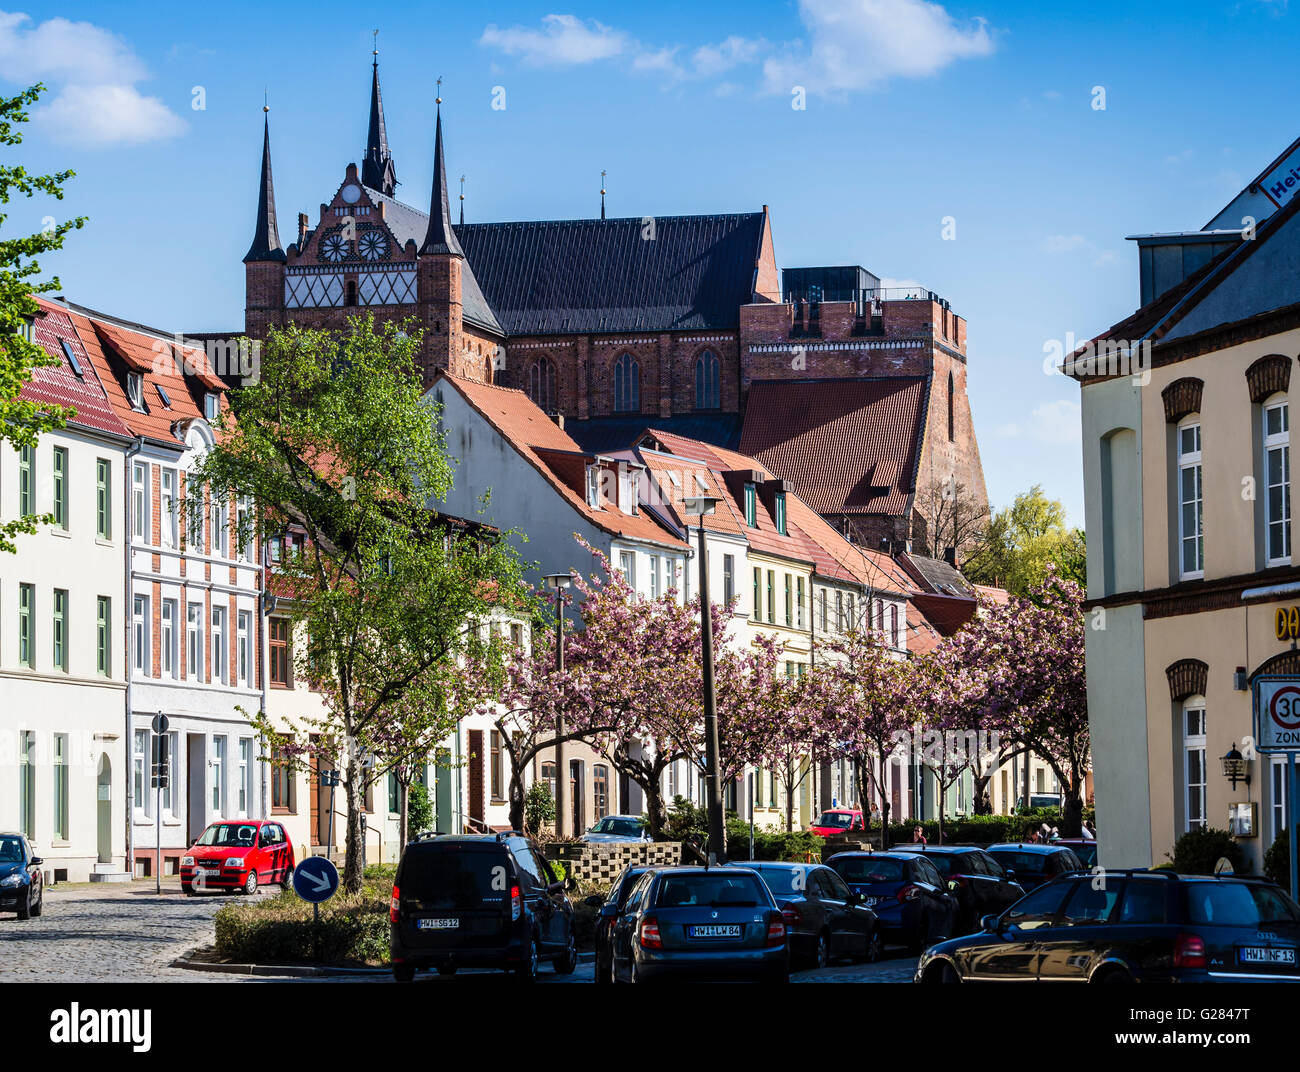 St. Georgen church, seen over row of houses, Wismar, Mecklenburg-Vorpommern, Germany Stock Photo